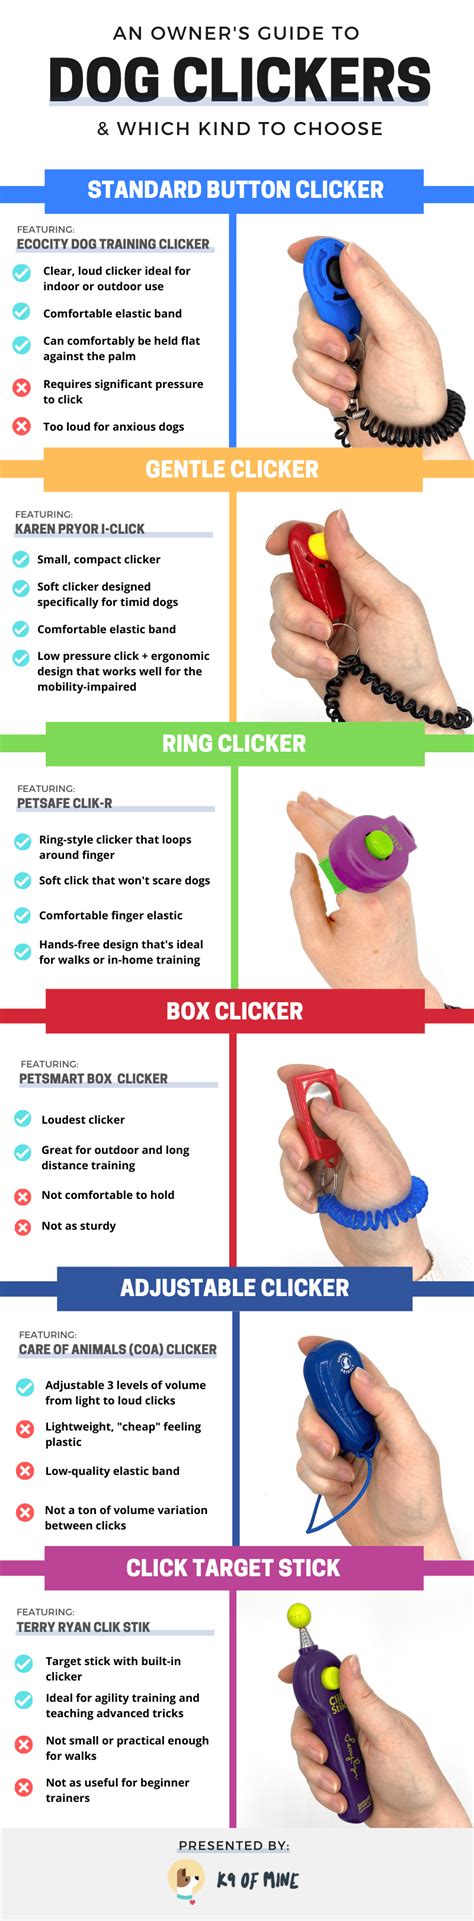 What Do Dog Clickers Do